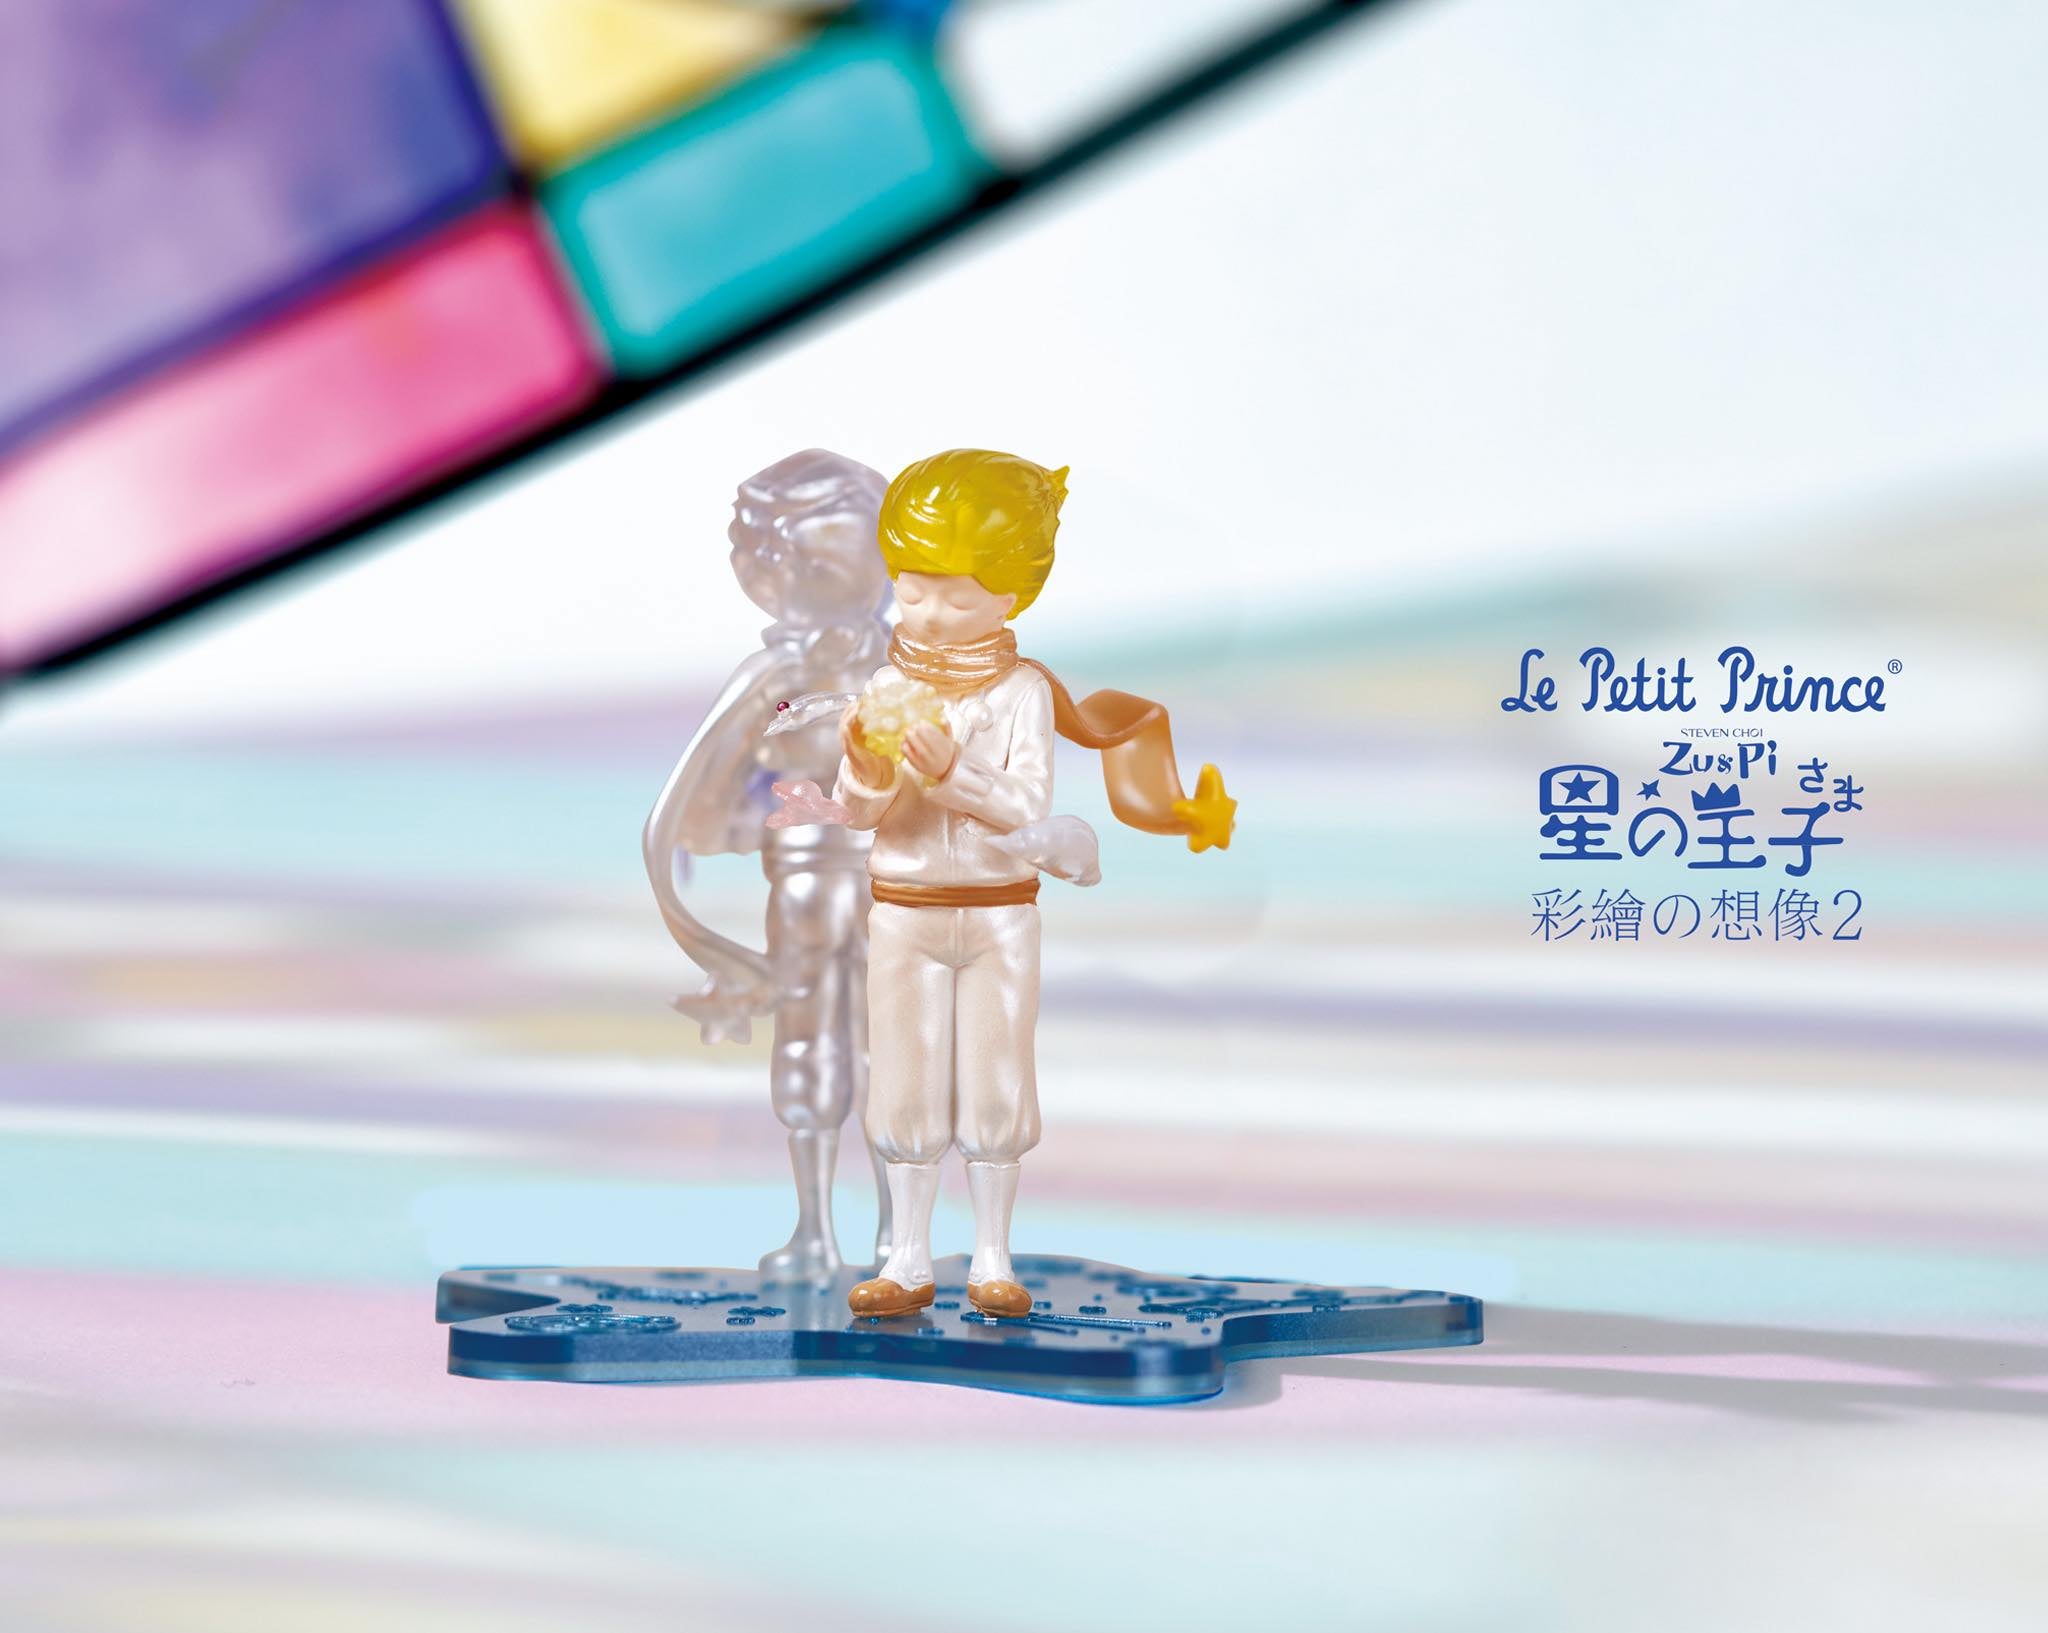 A blind box toy: The Little Prince Vol. 4 - Stained Glass Special Edition by Zu & Pi. Includes 6 regular designs and 1 secret. Limited art print.